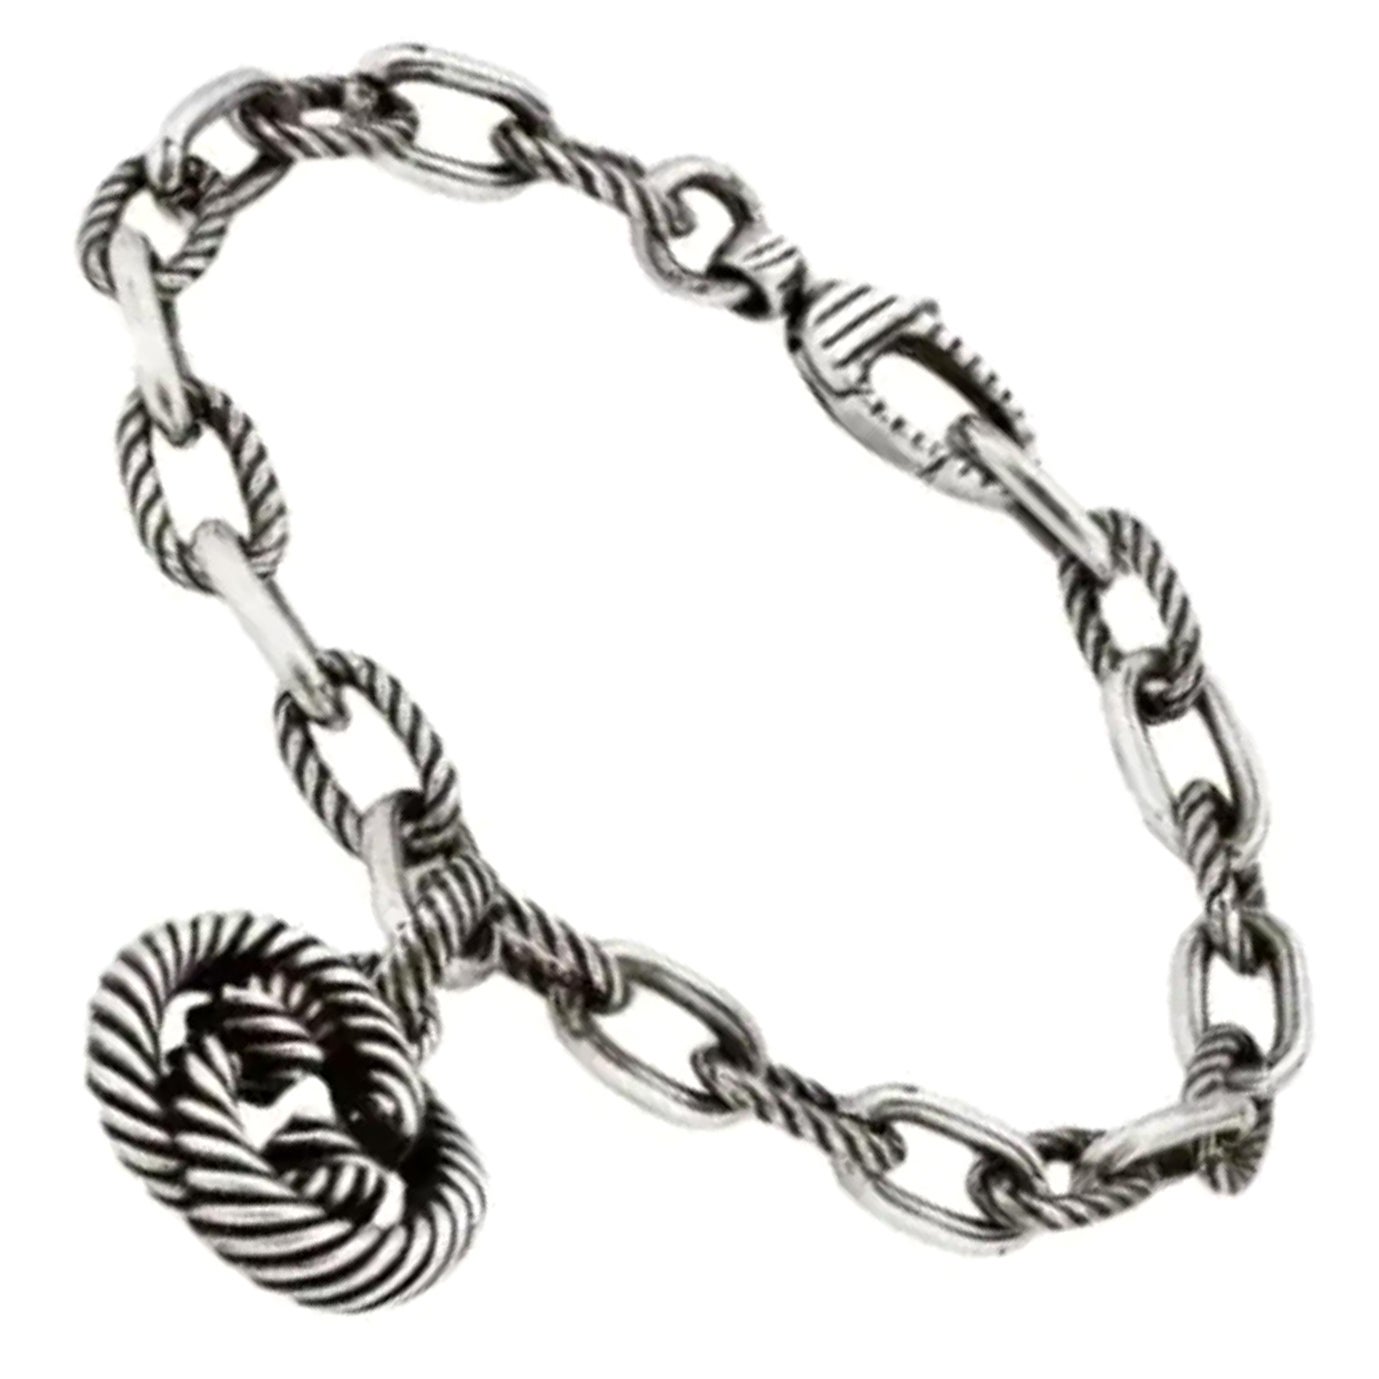 Gucci Interlocking G Twisted Charm Bracelet 925 Sterling Silver 7 Inches